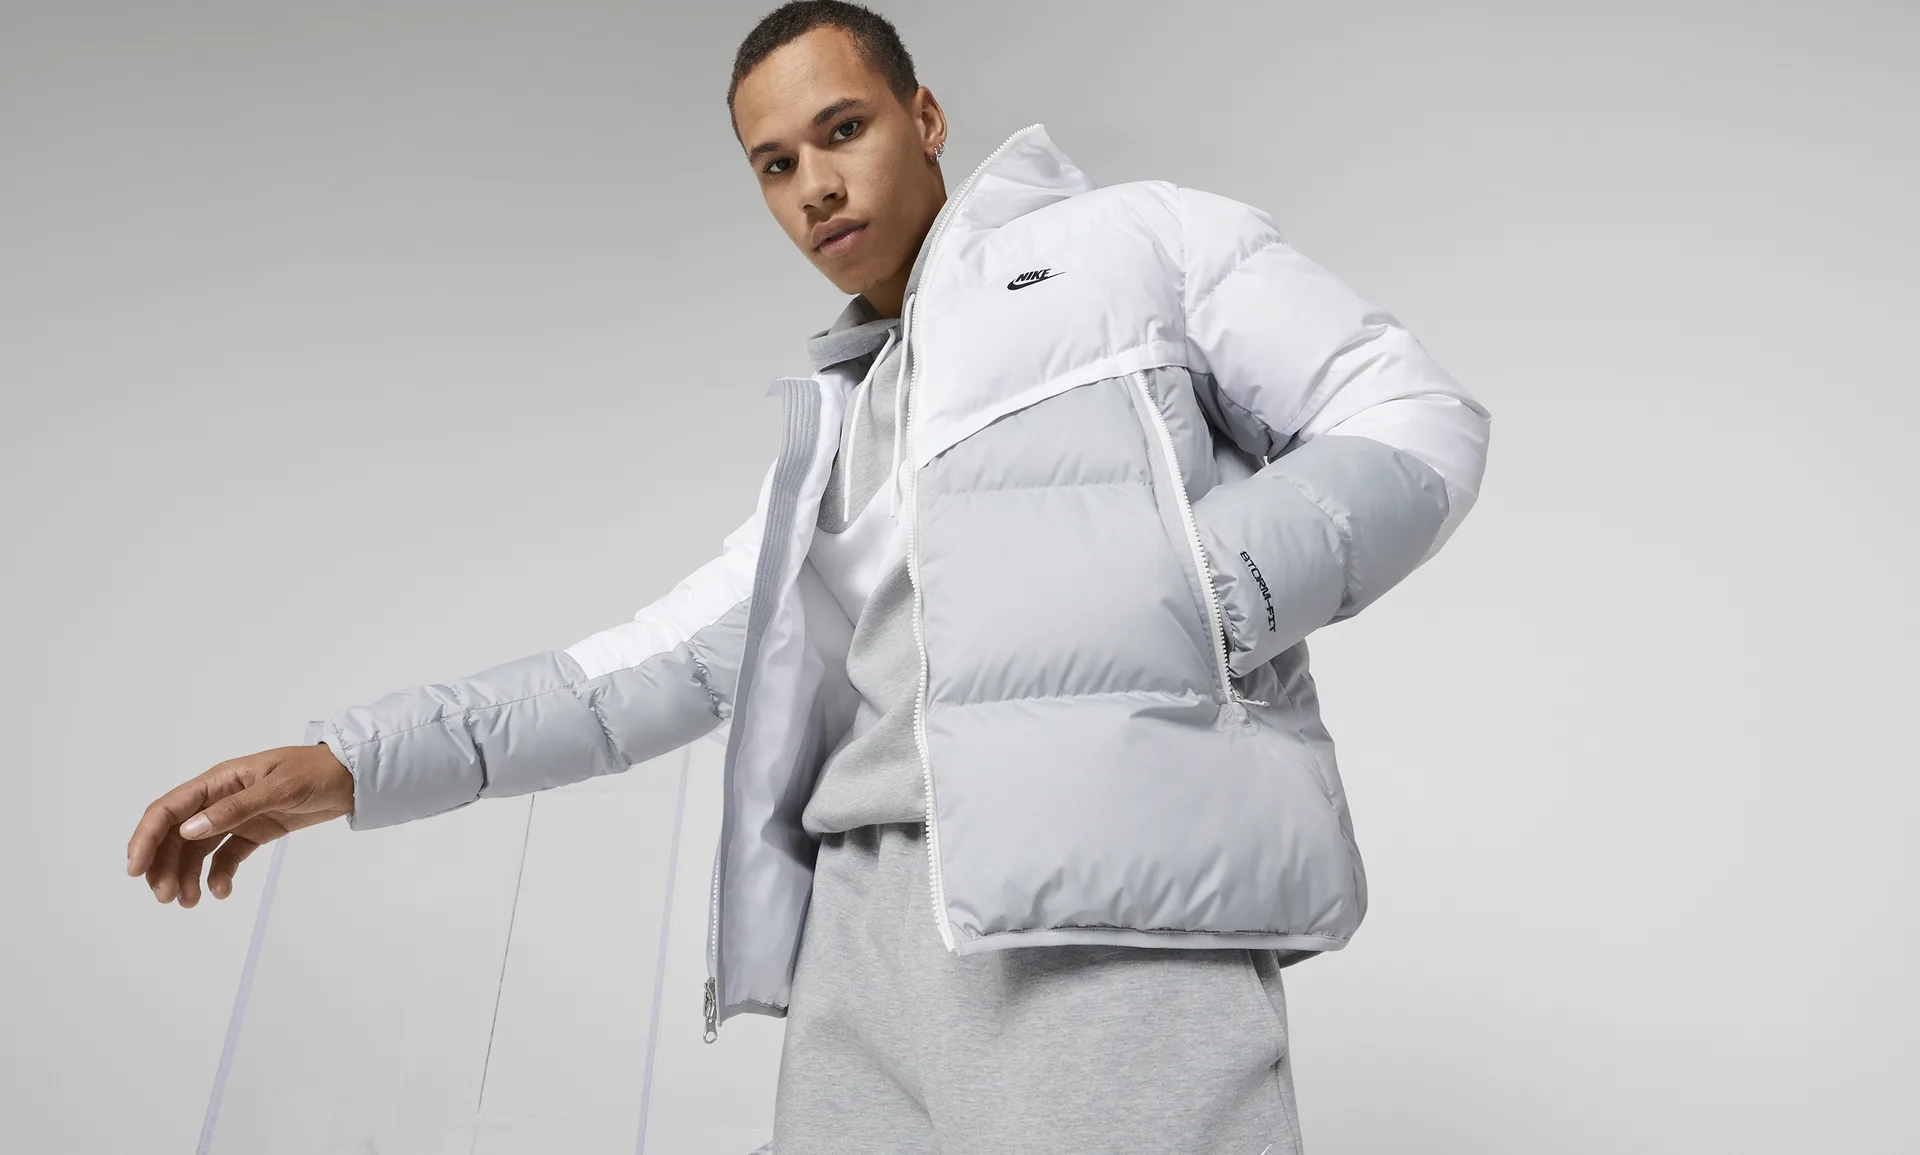 29% OFF on Nike Sportswear Storm-FIT Windrunner now $150.99 + delivery at Nike